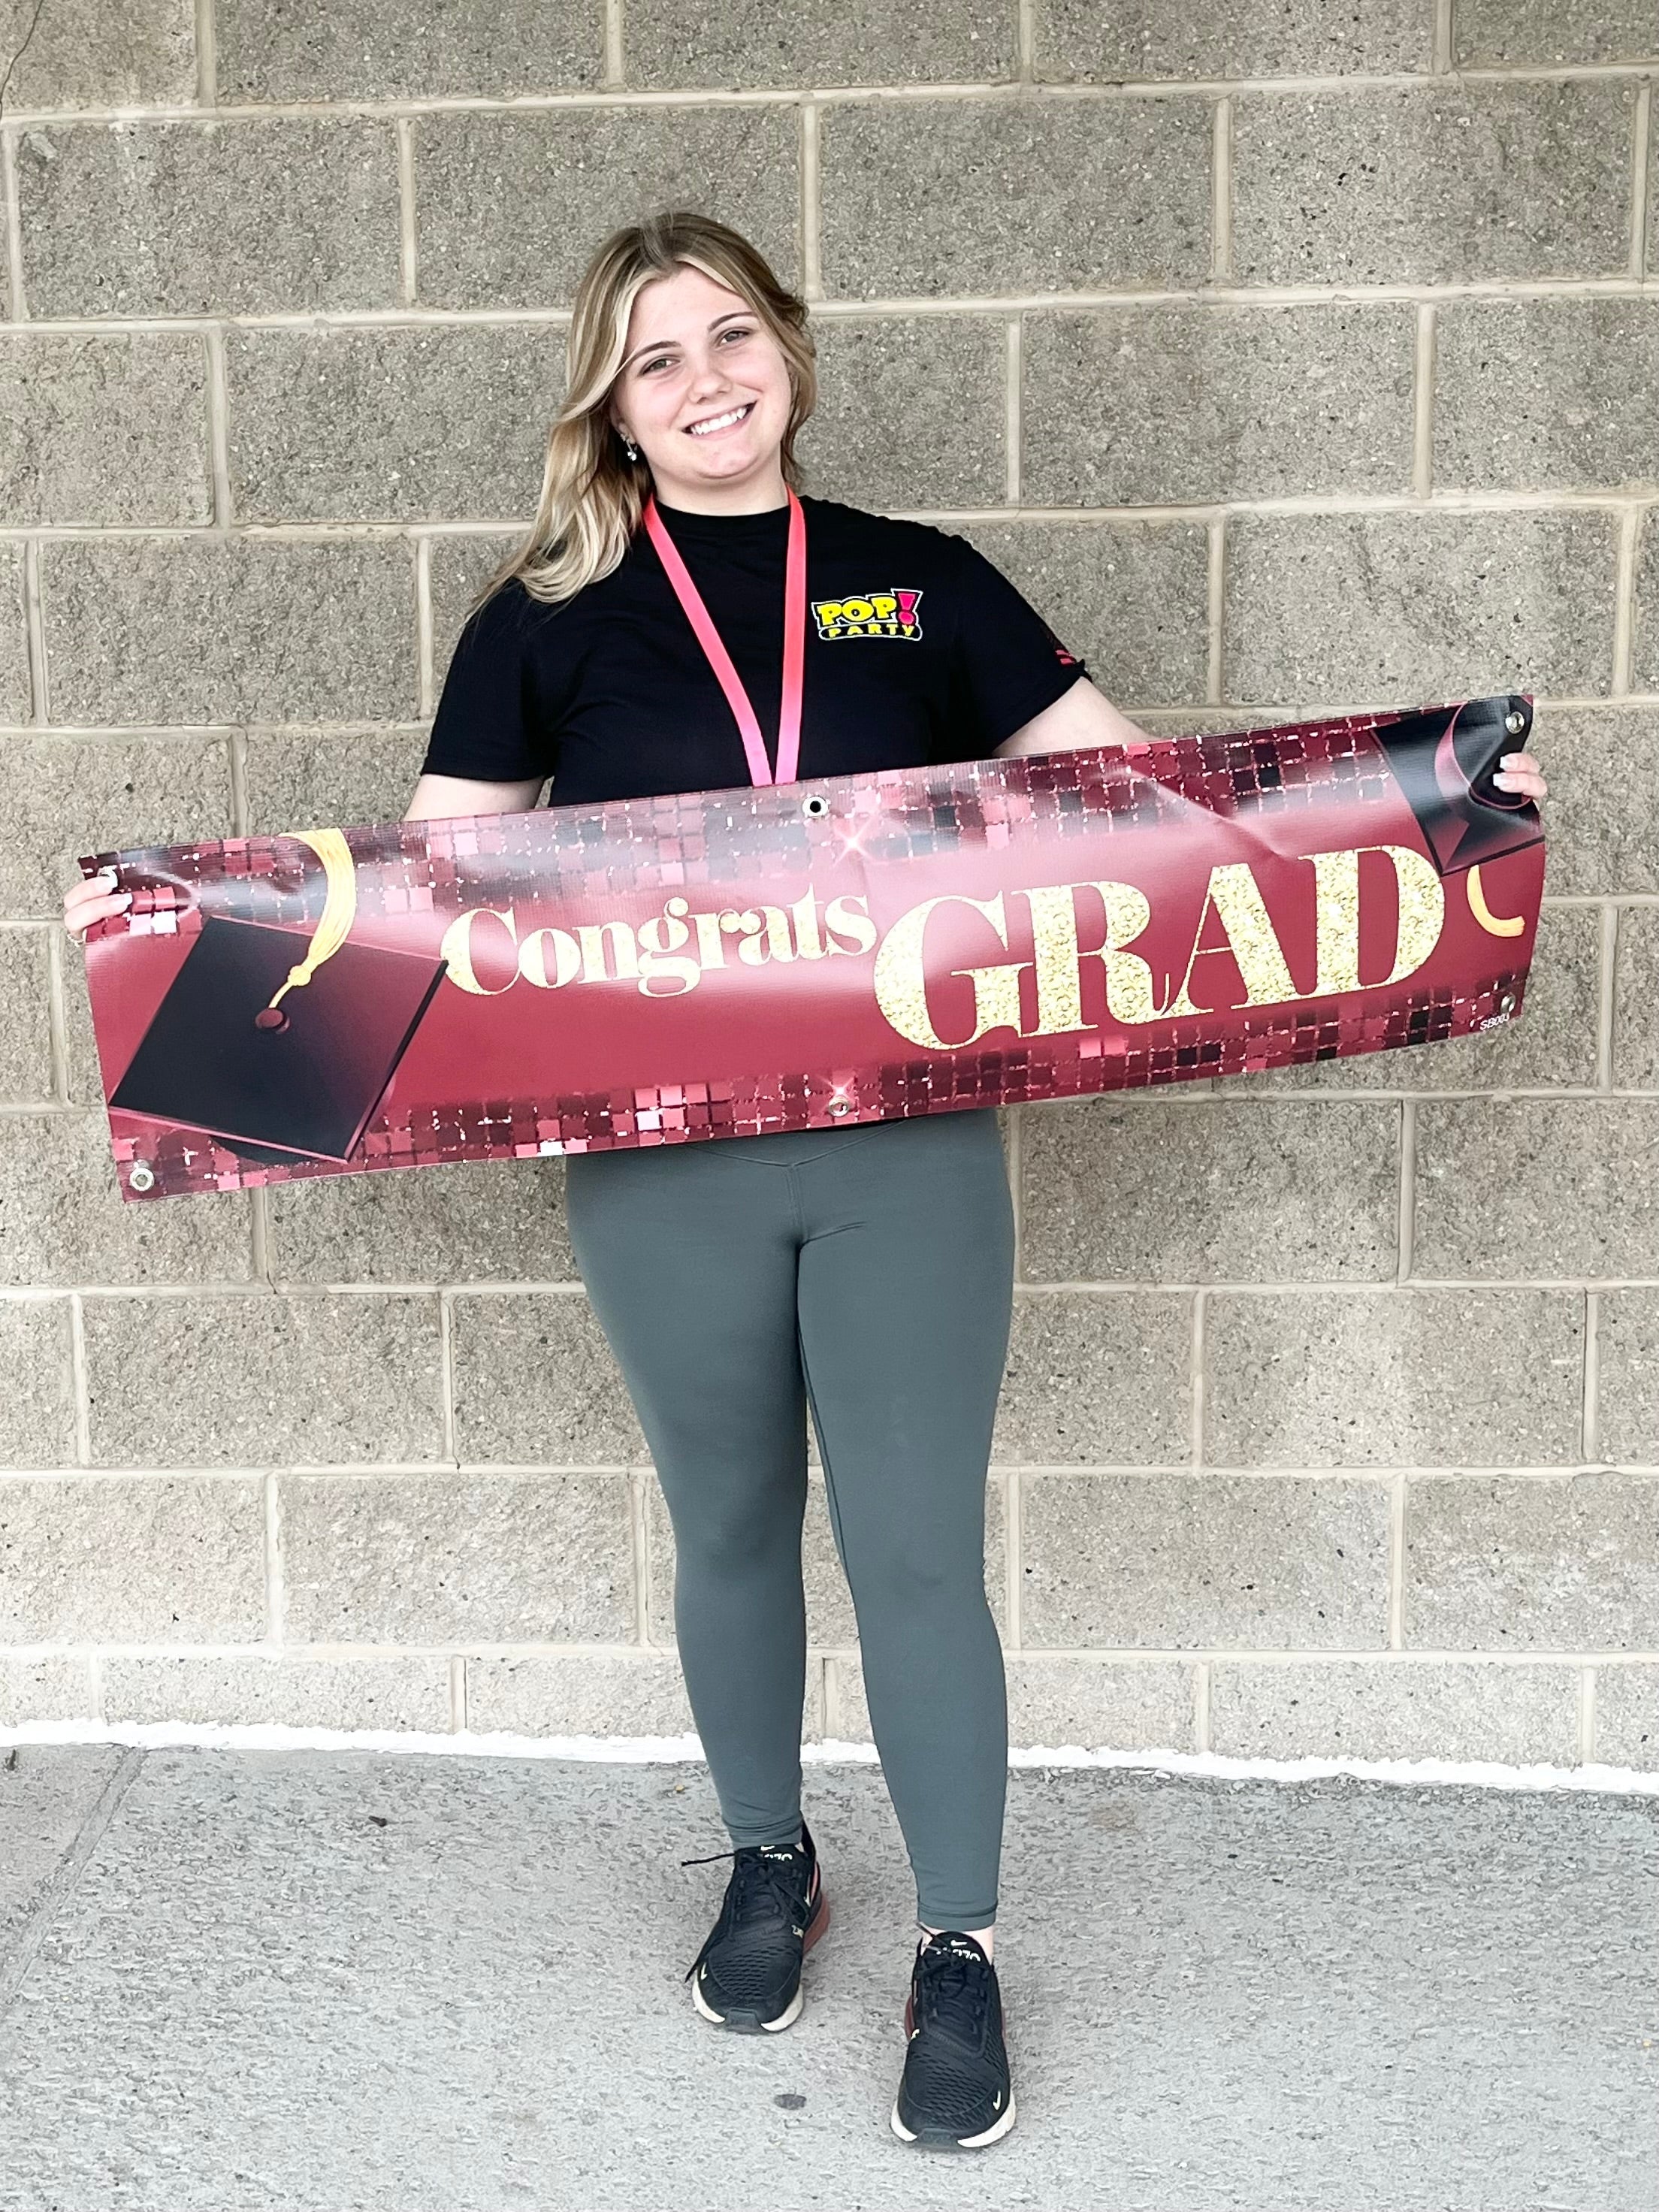 Grad Banners - Choose Your Colors - POPPartyballoons